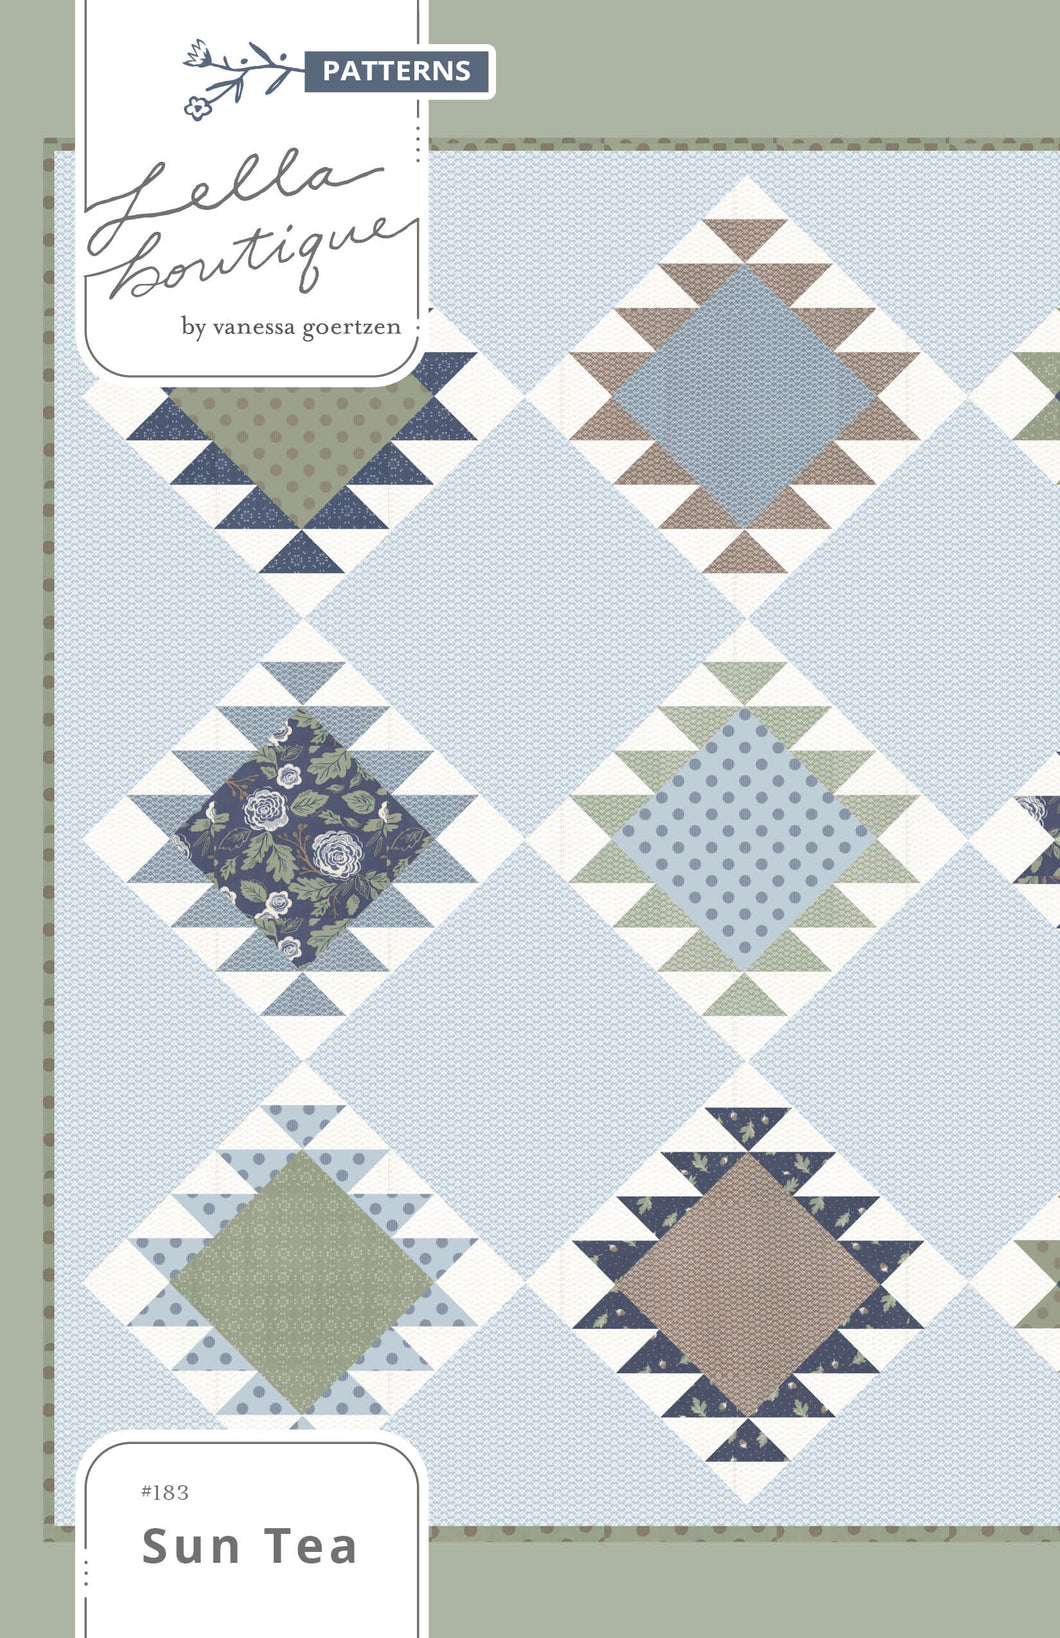 Sun Tea simple boho quilt design by Lella Boutique. Make it with fat quarters. Fabric is Harvest Road by Lella Boutique for Moda Fabrics. Download the PDF here!